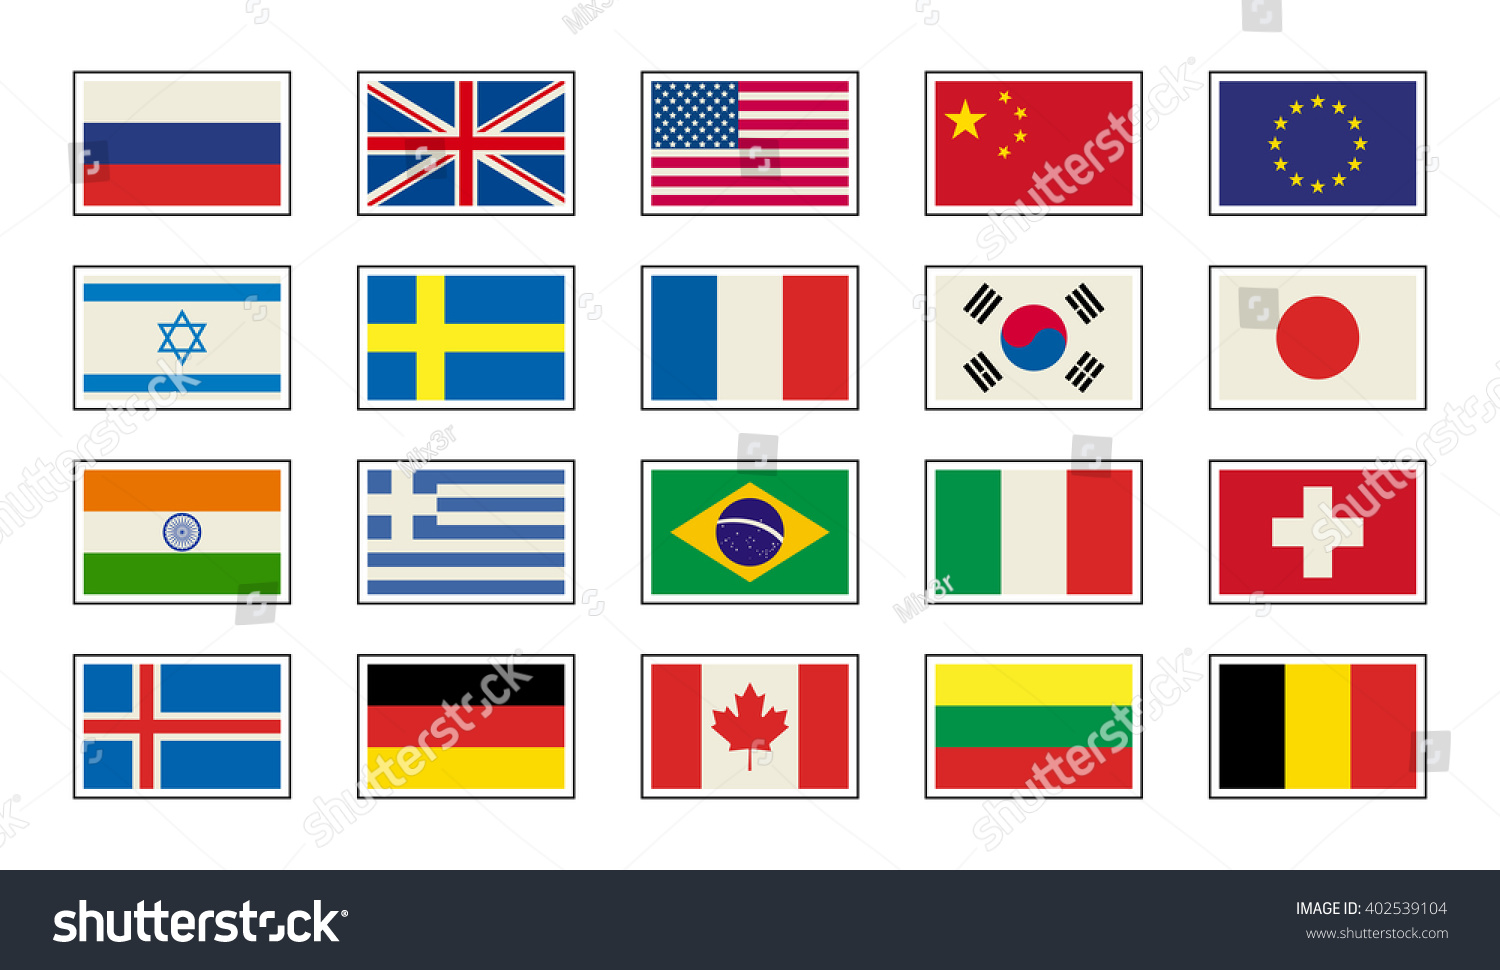 Flags Icons In Flat Style. Simple Flags Of The Countries Stock Vector ...